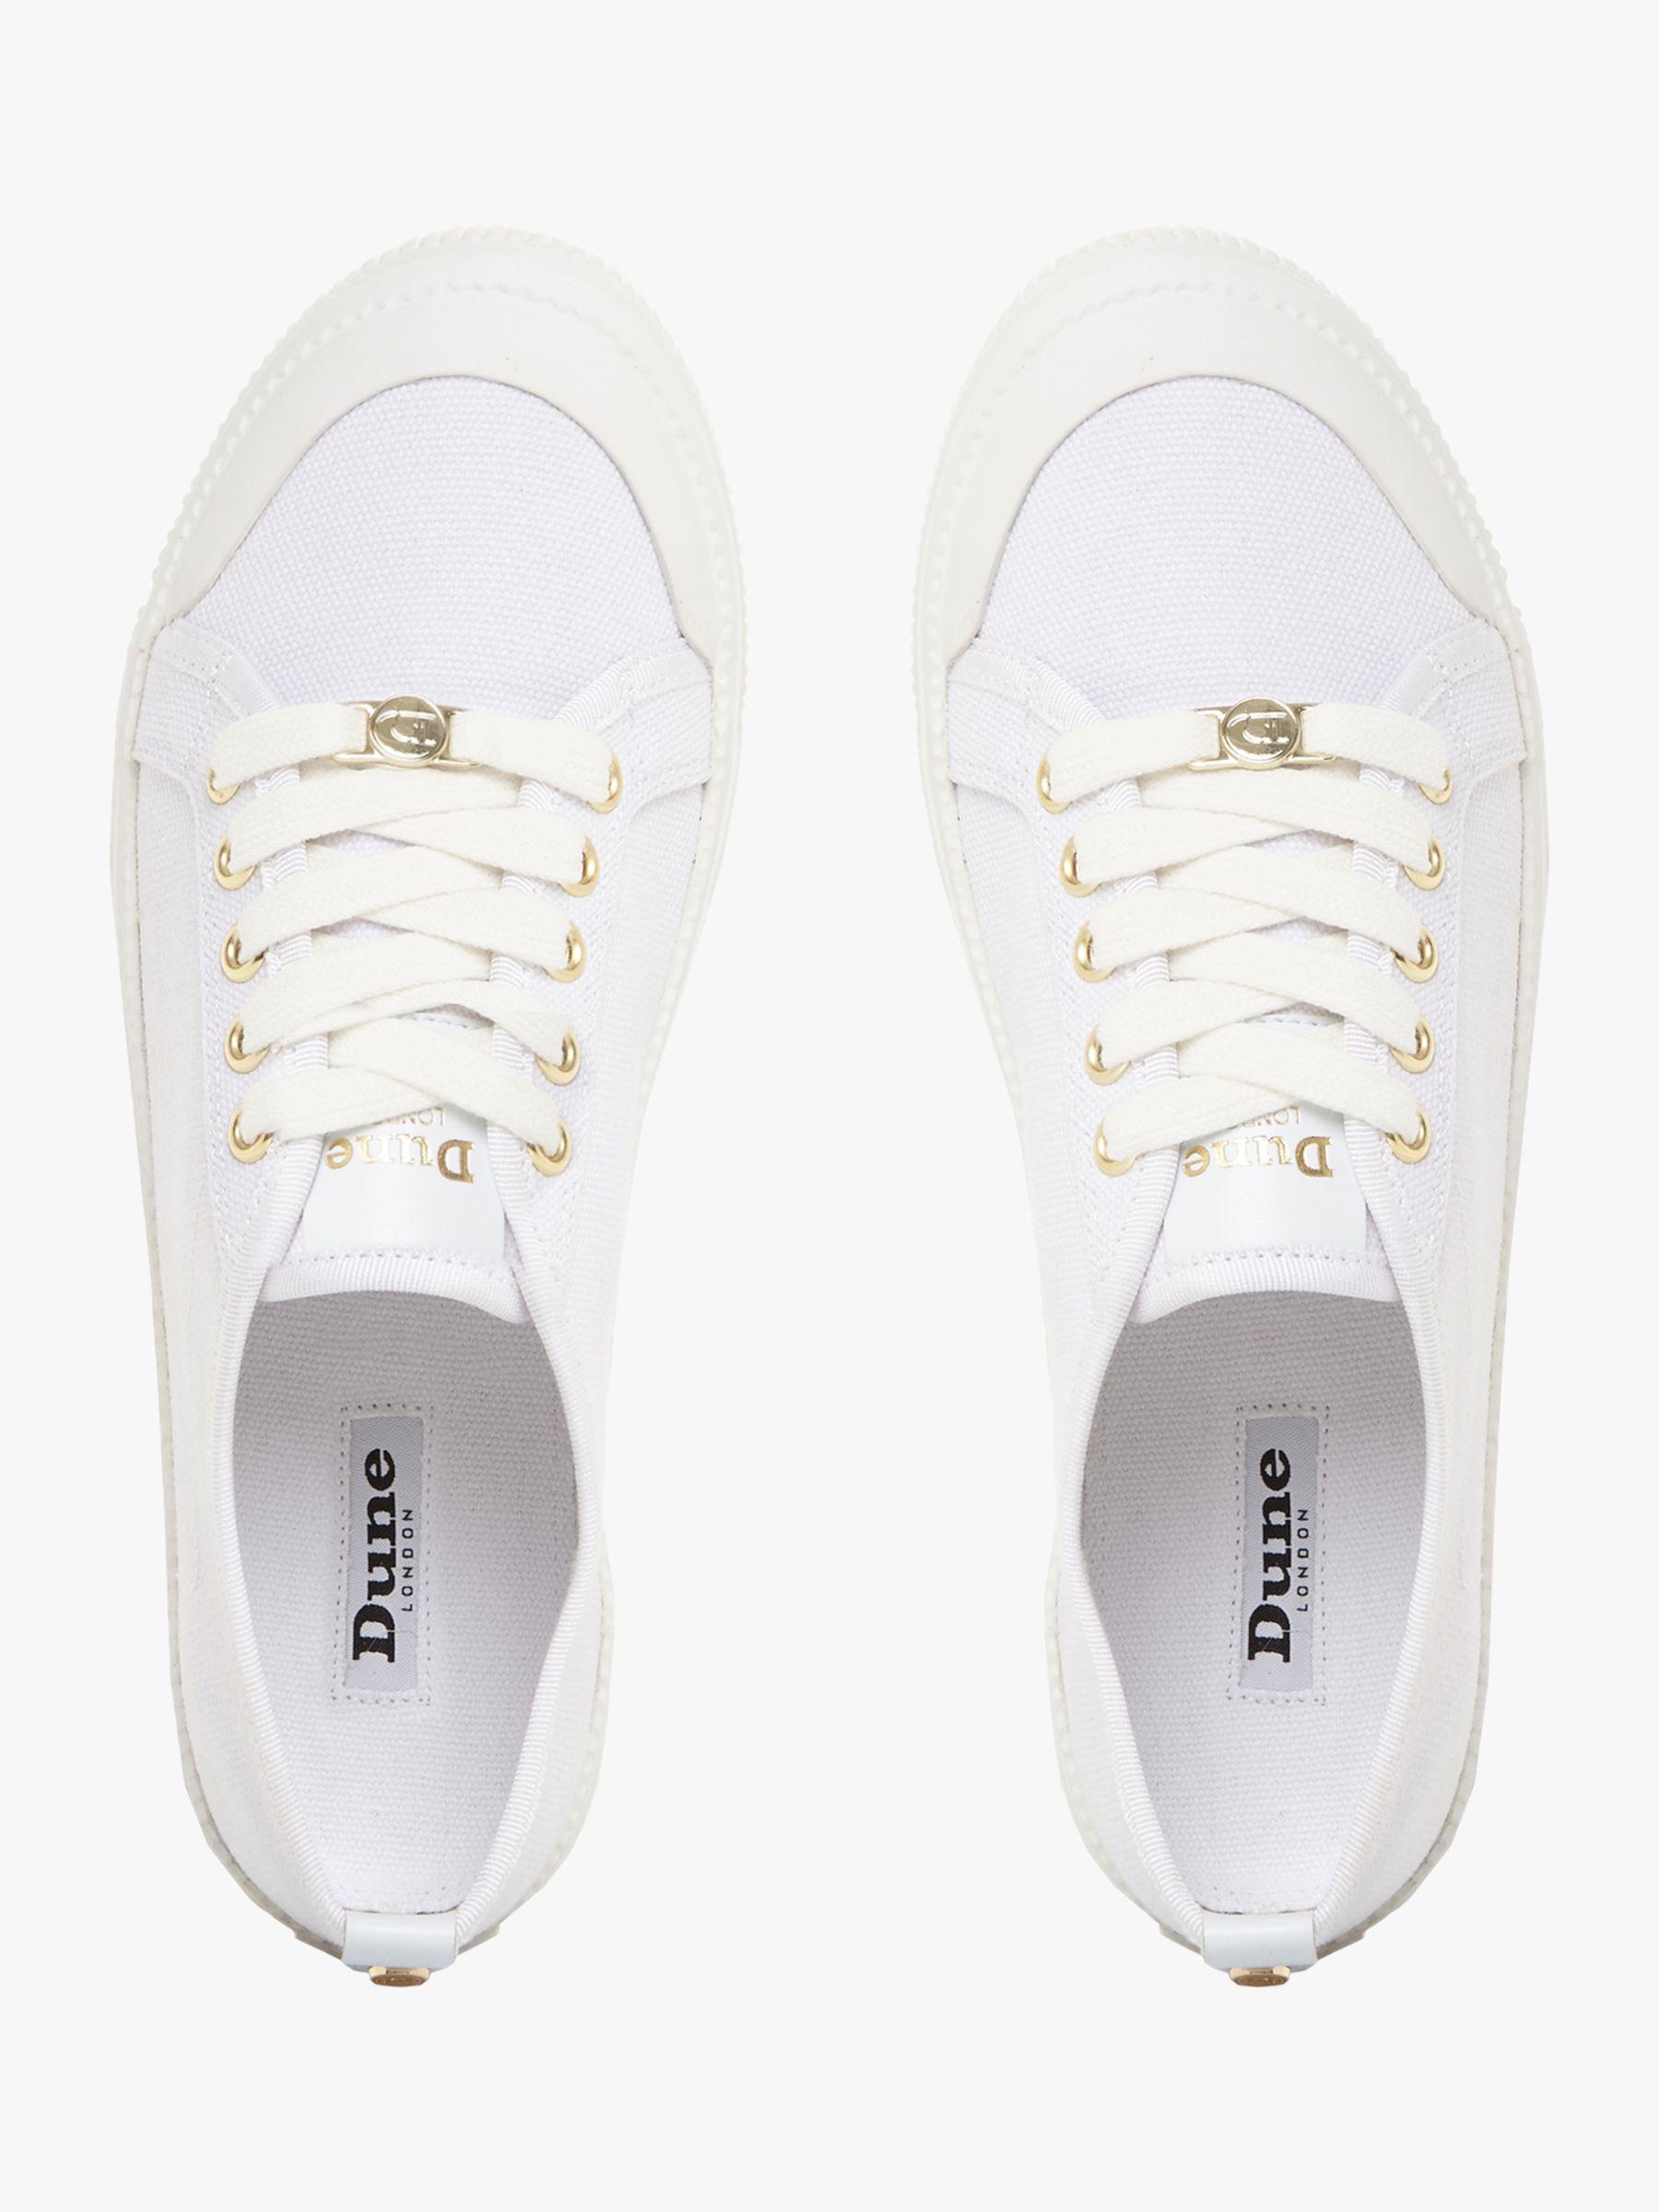 Dune Eswyn Lace Up Canvas Trainers in 